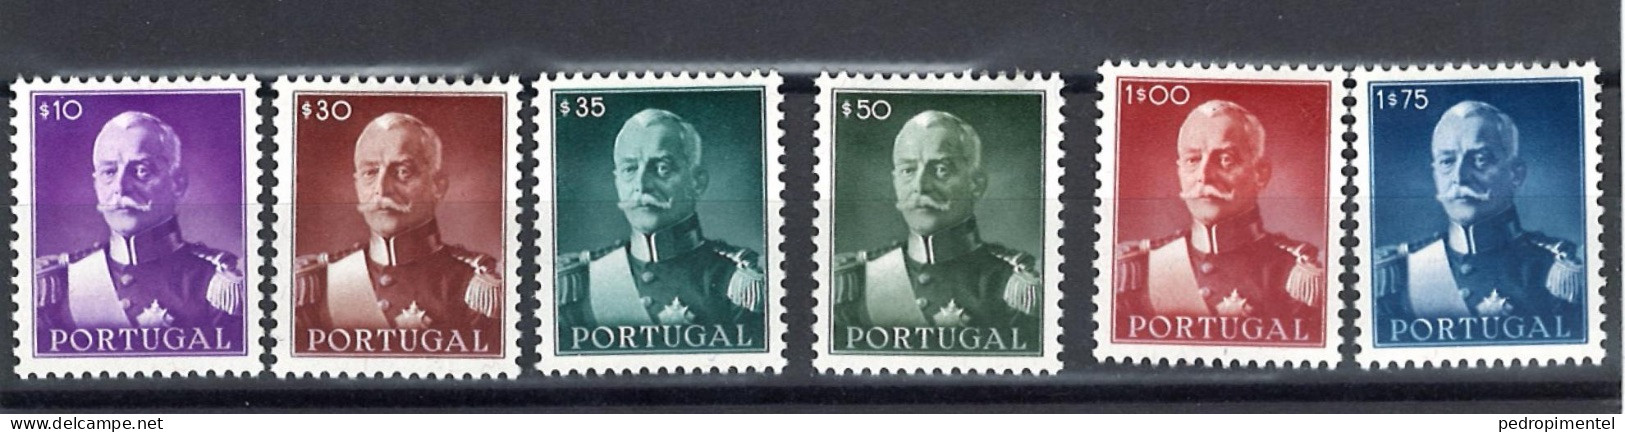 Portugal Stamps 1945 "President Carmona" Condition MH #652-657 - Unused Stamps